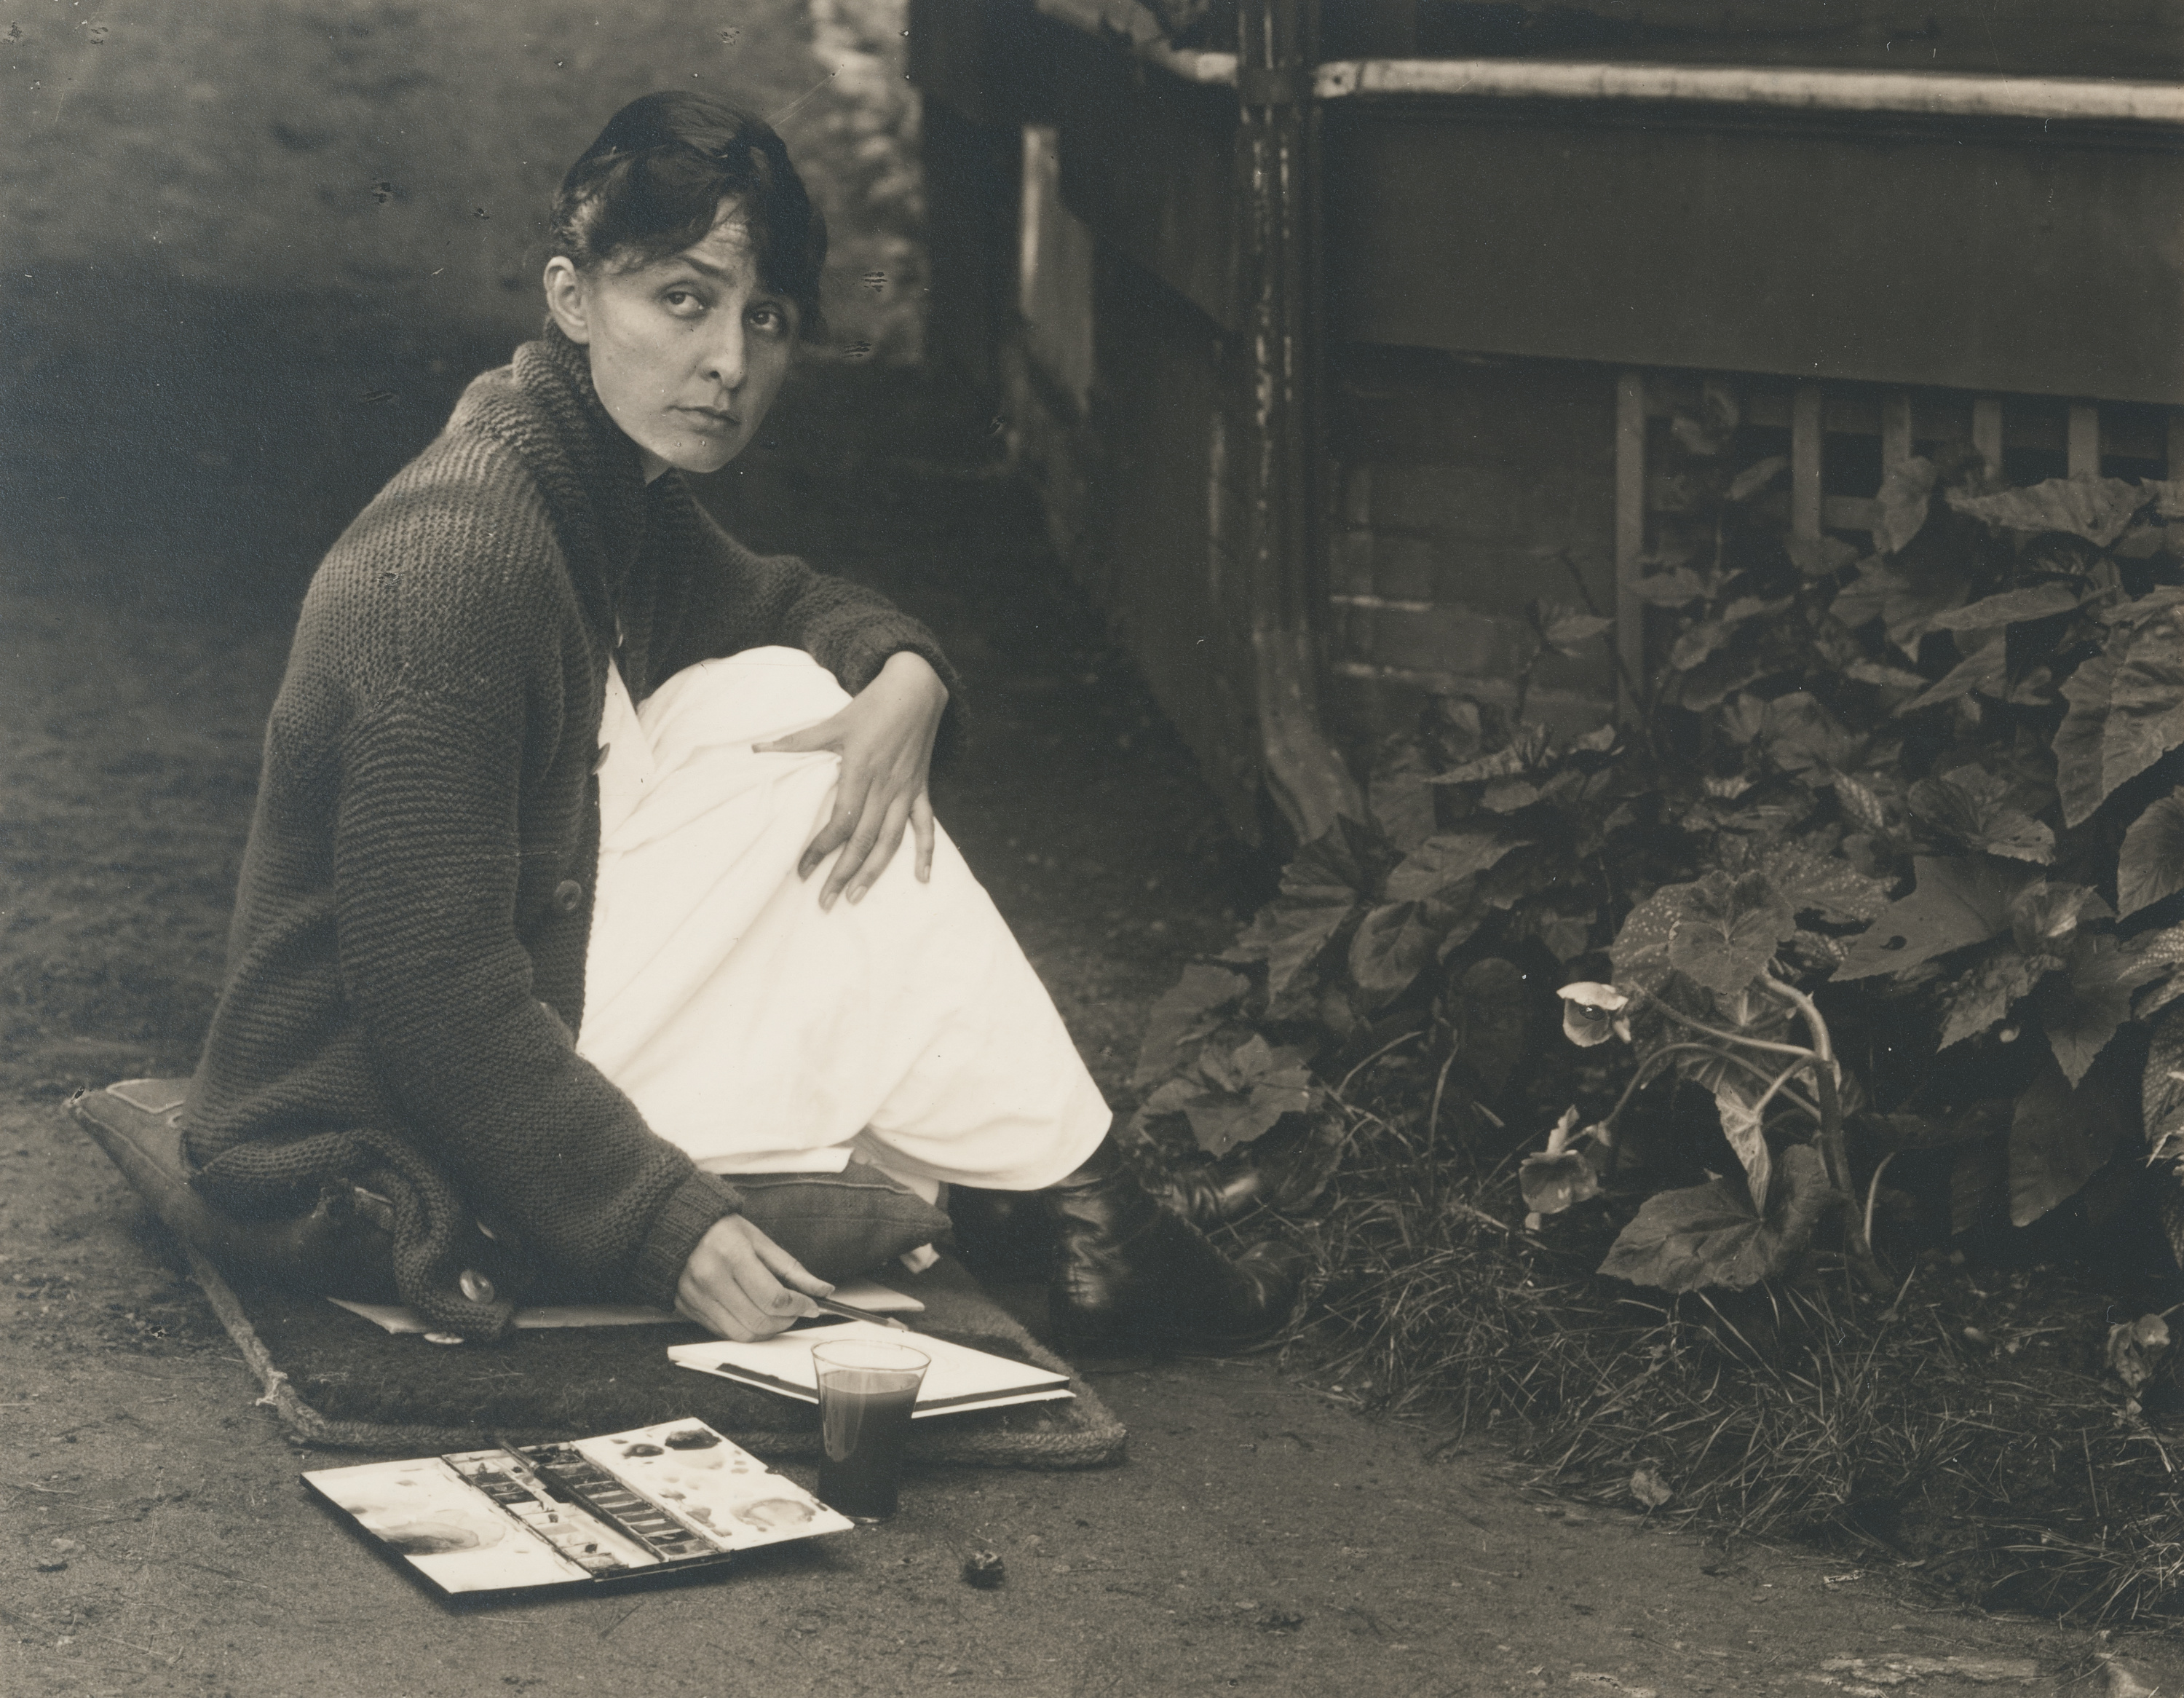 Black and white photograph of Georgia O'Keeffe sitting in the garden with her sketchbook.